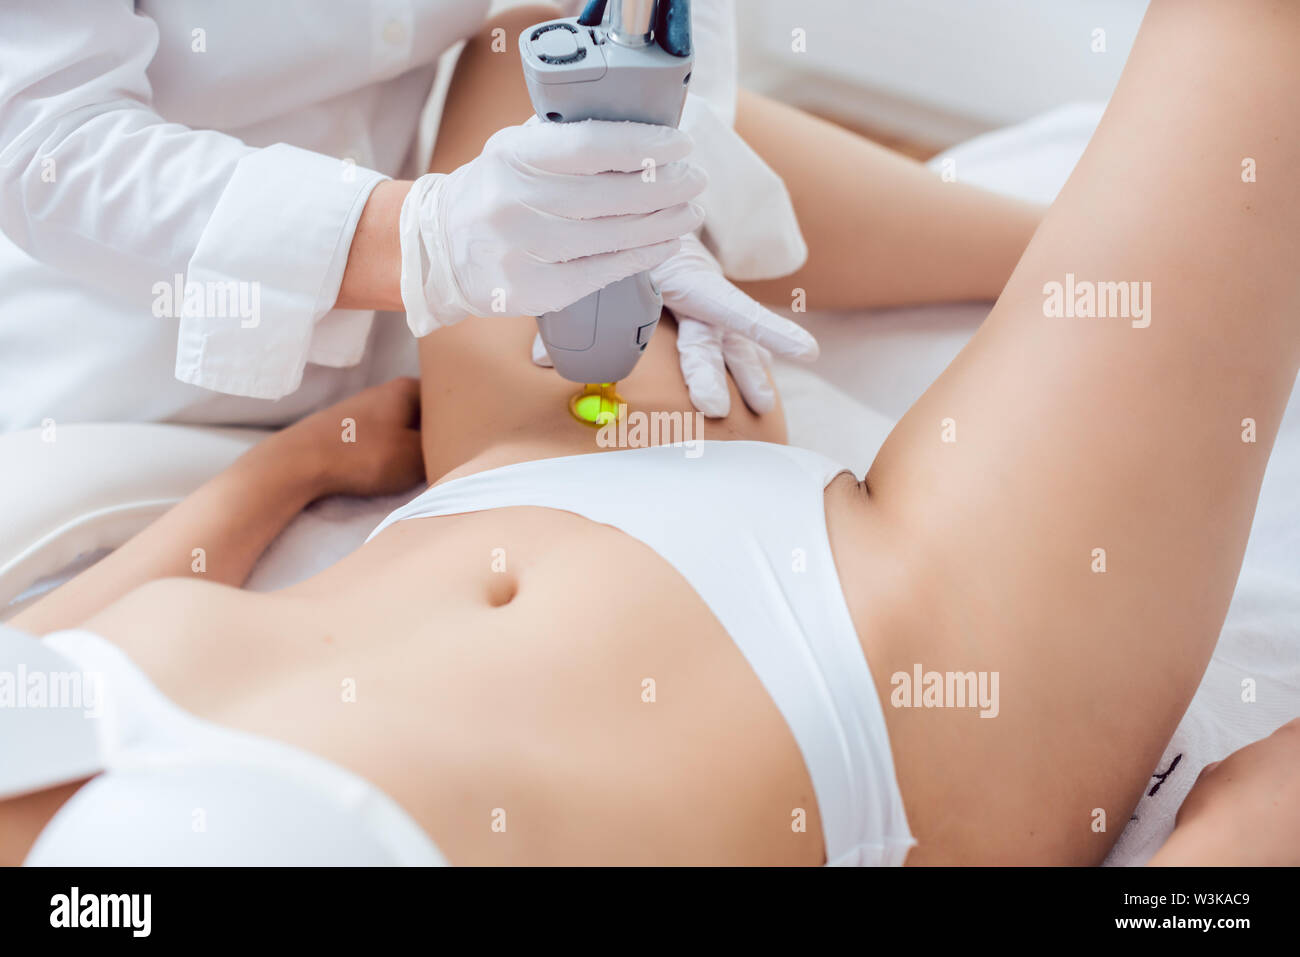 Hair removal in bikini zone using a laser device on young woman Stock Photo  - Alamy